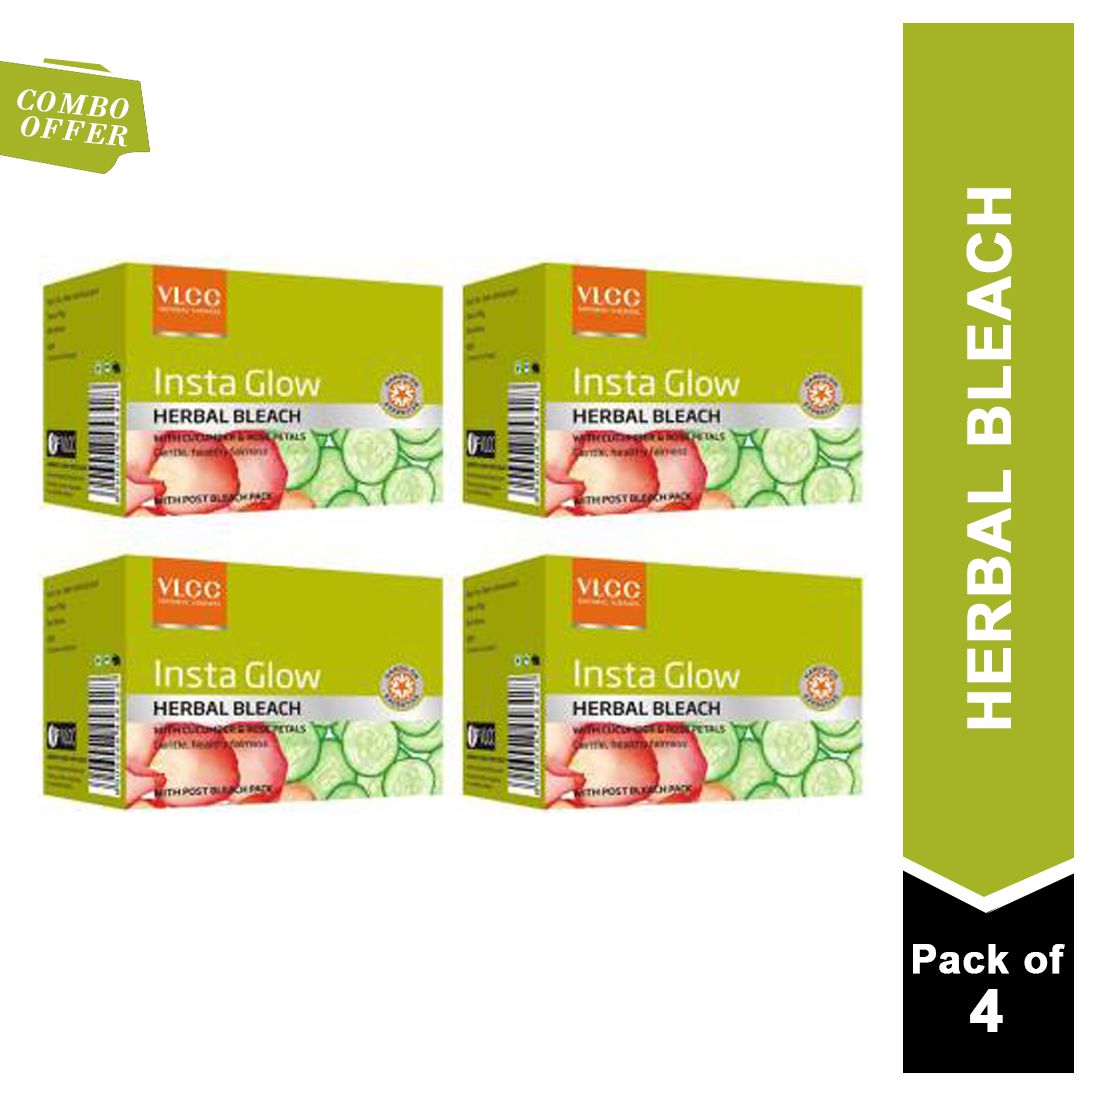 Vlcc Insta Glow Herbal Bleach 54 Gm Each Pack Of 4 Buy Vlcc Insta Glow Herbal Bleach 54 Gm Each Pack Of 4 At Best Prices In India Snapdeal